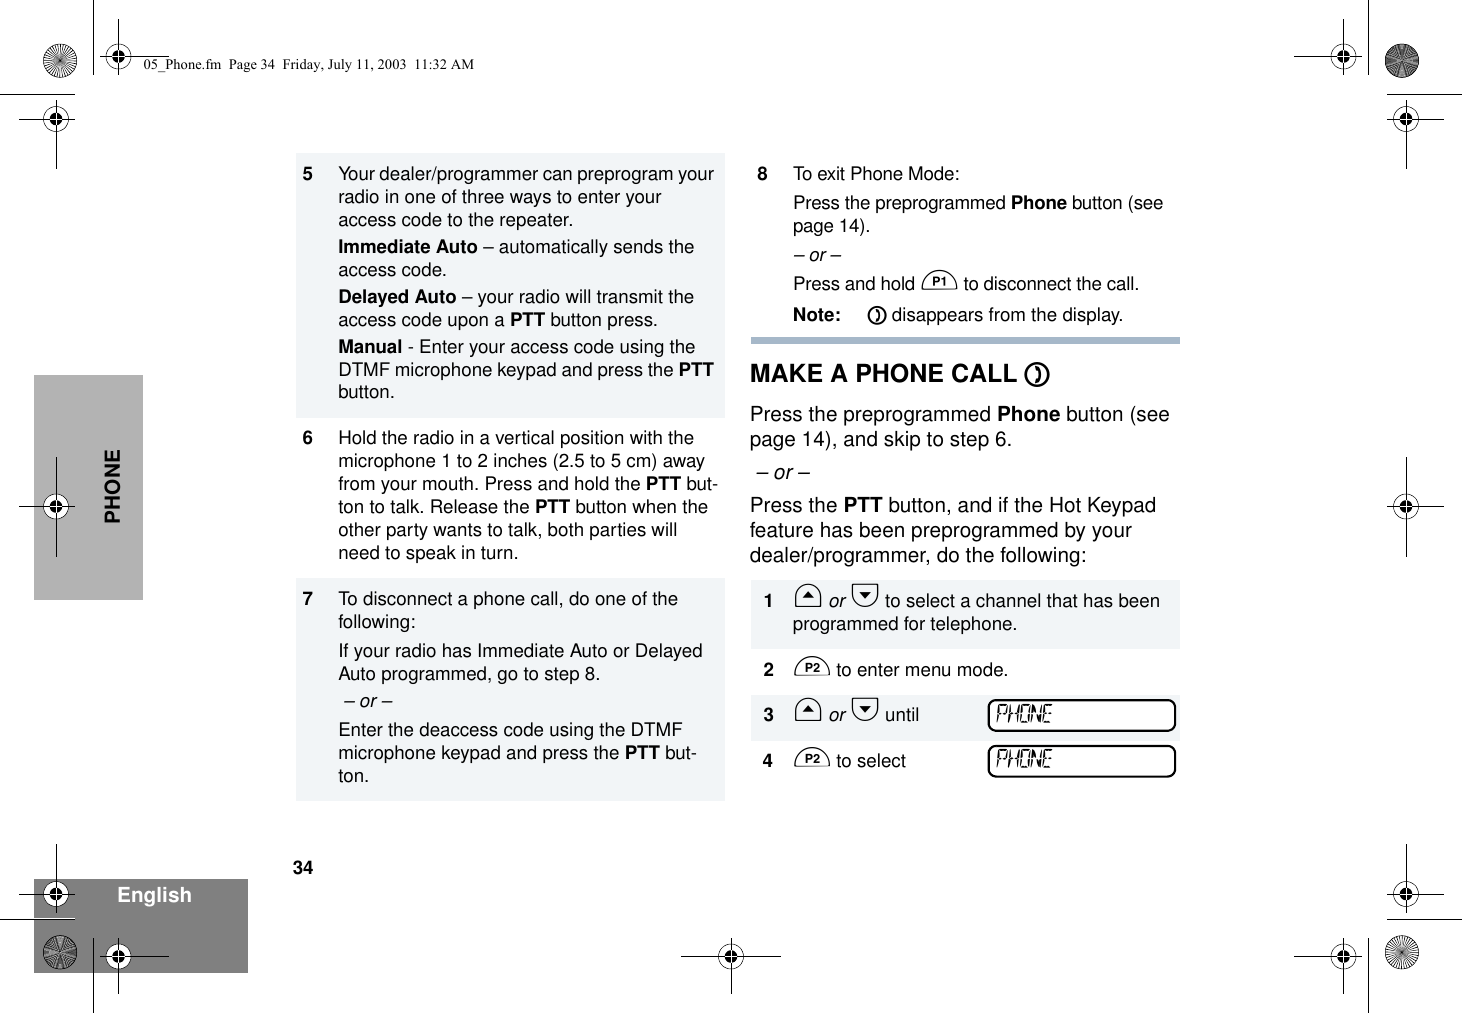 34EnglishPHONEMAKE A PHONE CALL DPress the preprogrammed Phone button (see page 14), and skip to step 6.  – or – Press the PTT button, and if the Hot Keypad feature has been preprogrammed by your dealer/programmer, do the following:5Your dealer/programmer can preprogram your radio in one of three ways to enter your access code to the repeater. Immediate Auto – automatically sends the access code.Delayed Auto – your radio will transmit the  access code upon a PTT button press. Manual - Enter your access code using the DTMF microphone keypad and press the PTT button.6Hold the radio in a vertical position with the microphone 1 to 2 inches (2.5 to 5 cm) away from your mouth. Press and hold the PTT but-ton to talk. Release the PTT button when the other party wants to talk, both parties will need to speak in turn.7To disconnect a phone call, do one of the following:If your radio has Immediate Auto or Delayed Auto programmed, go to step 8. – or –Enter the deaccess code using the DTMF microphone keypad and press the PTT but-ton.8To exit Phone Mode:Press the preprogrammed Phone button (see page 14).– or –Press and hold C to disconnect the call. Note: D disappears from the display.1G or H to select a channel that has been programmed for telephone.2D to enter menu mode.3G or H until4D to selectPHONEPHONE05_Phone.fm  Page 34  Friday, July 11, 2003  11:32 AM